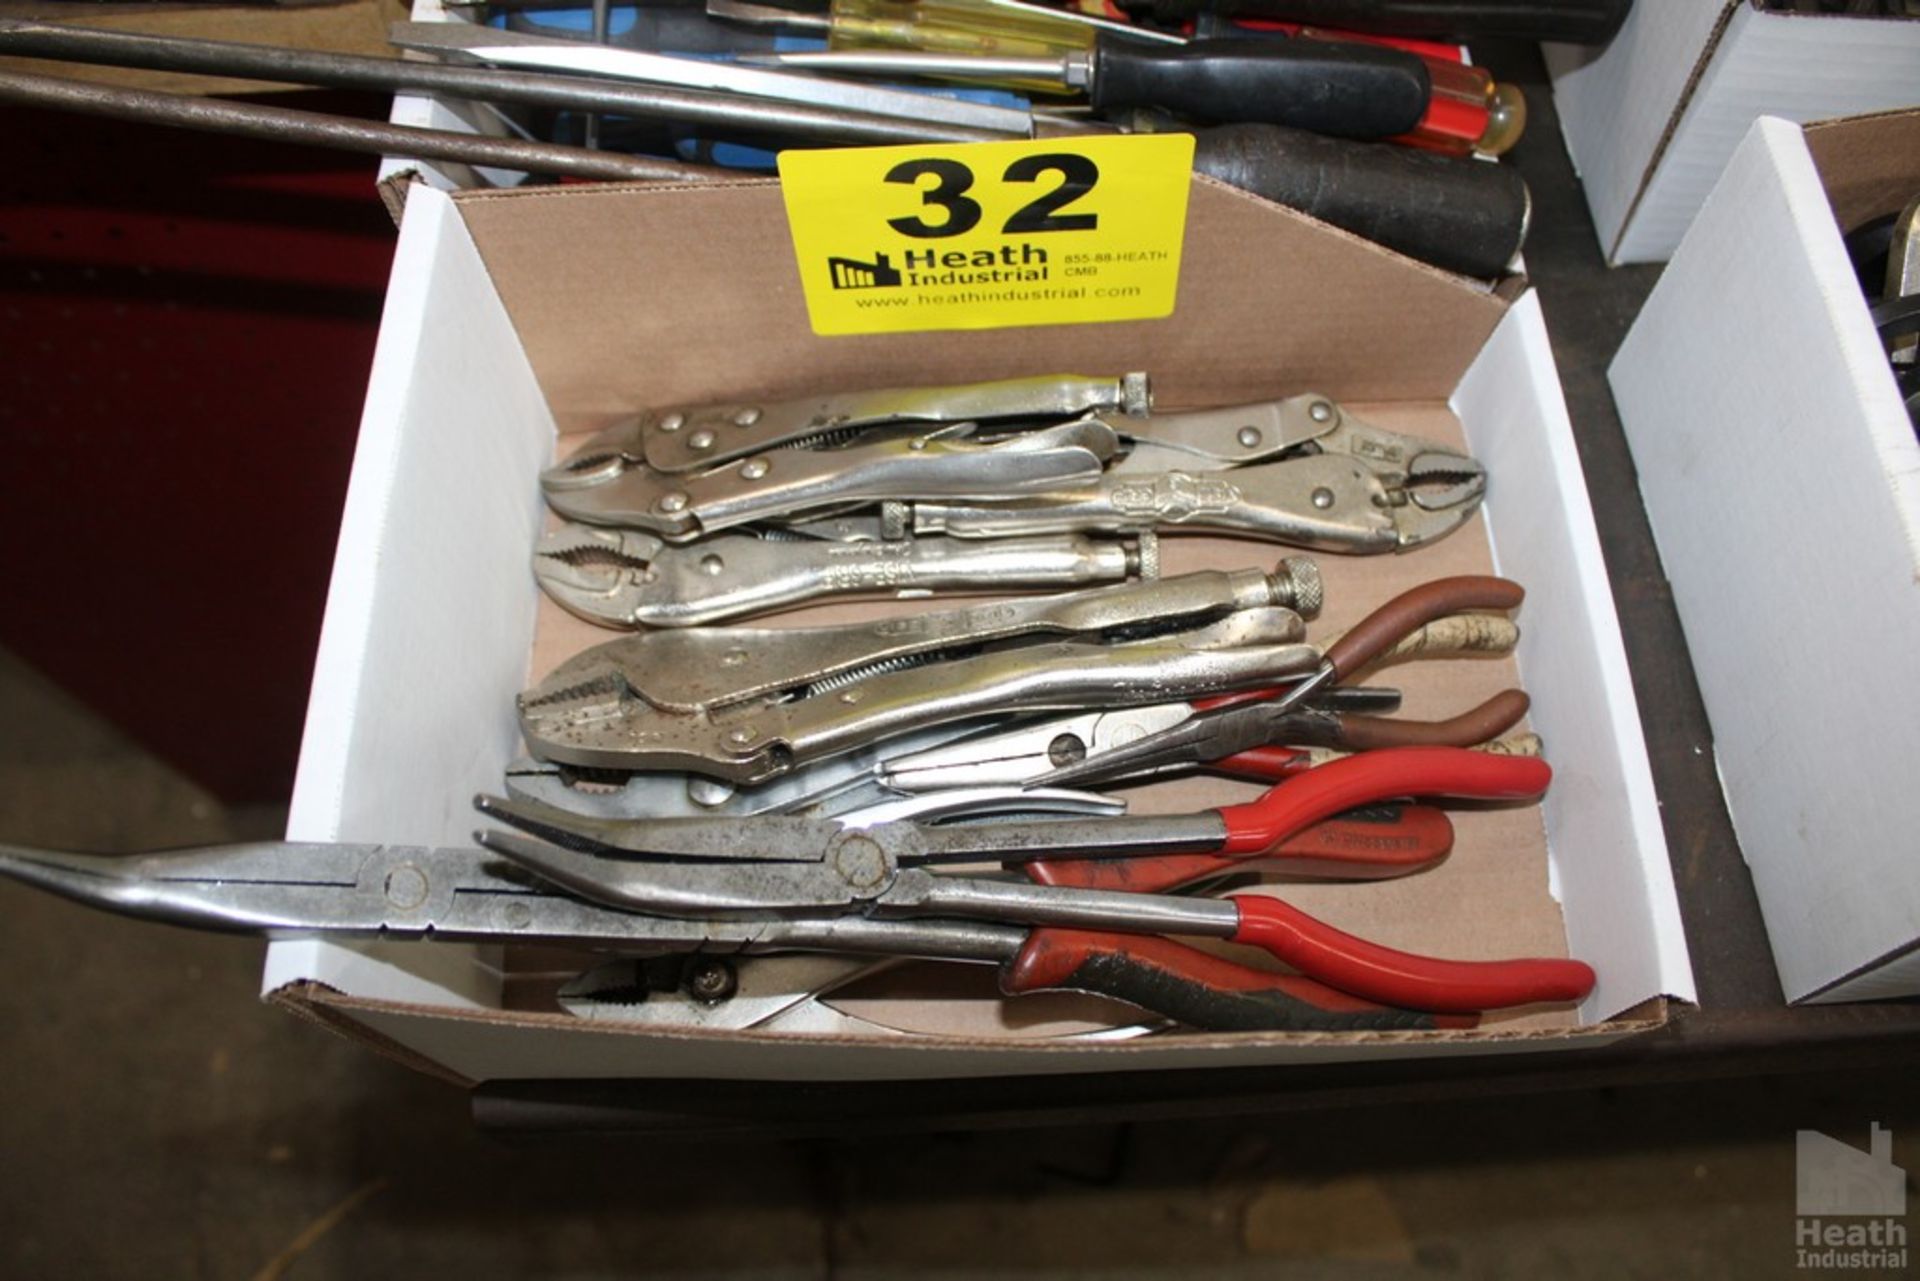 VISE GRIPS, PLIERS AND NEEDLE NOSE PLIERS IN BOX